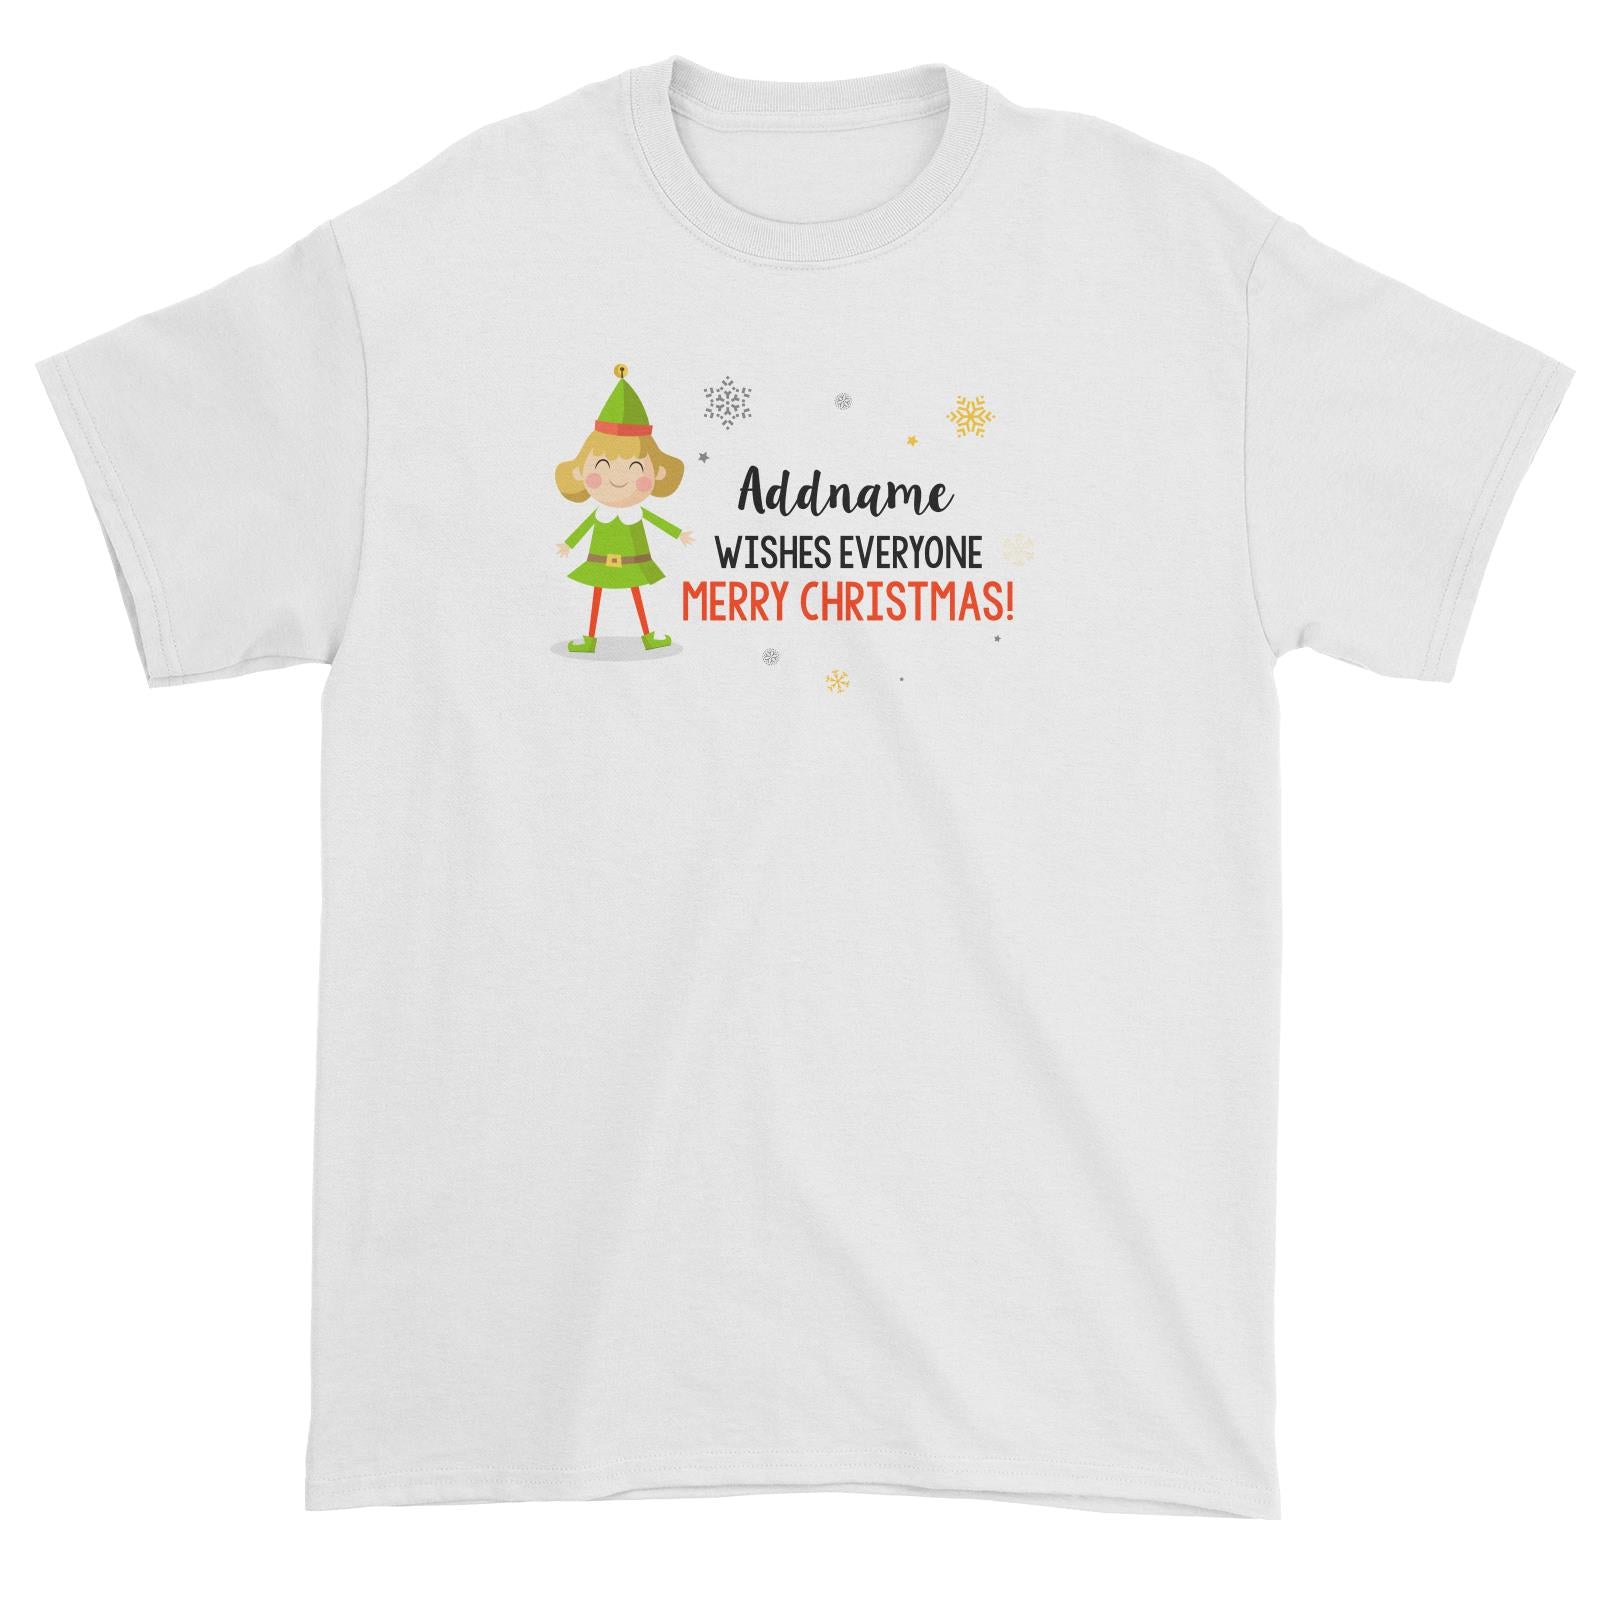 Cute Elf Woman Wishes Everyone Merry Christmas Addname Unisex T-Shirt  Matching Family Personalizable Designs